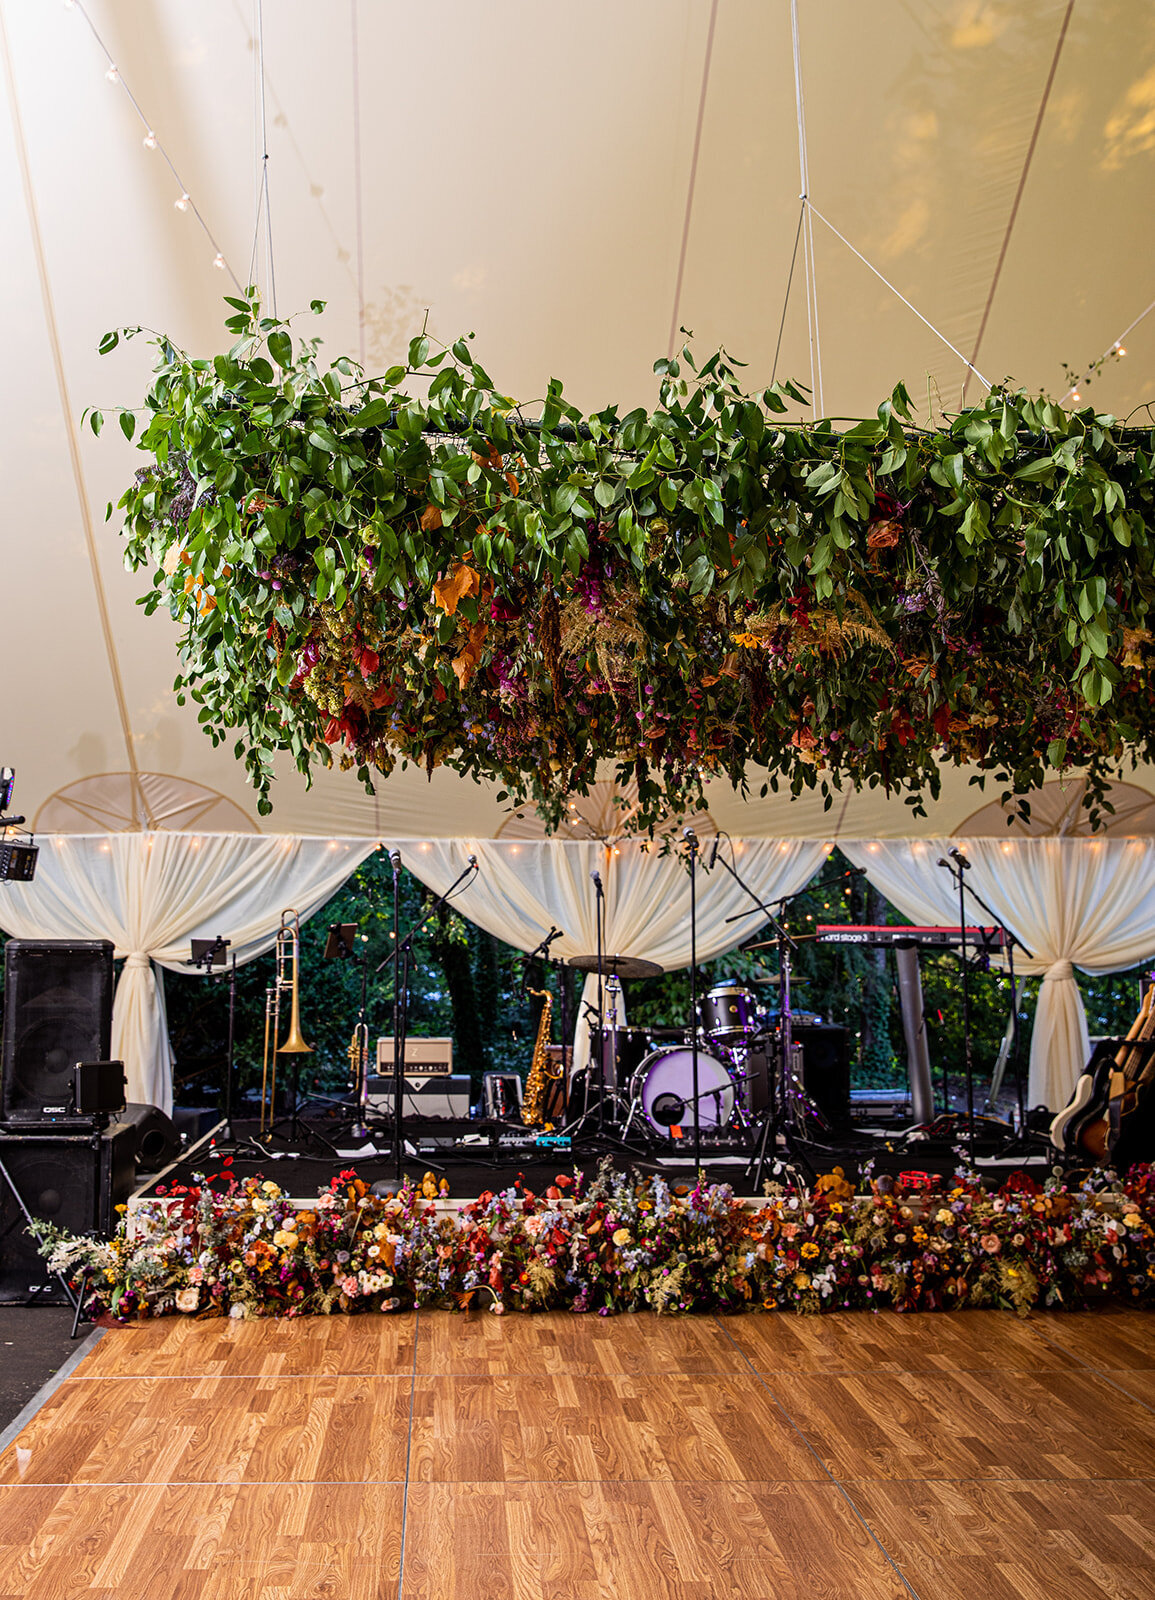 An oversized square hanging flower installation over the dance floor is a great alternative to a floral chandelier! Lush smilax vines, hops, copper beech, and bright wildflowers. RT Lodge and Nashville wedding floral designer.